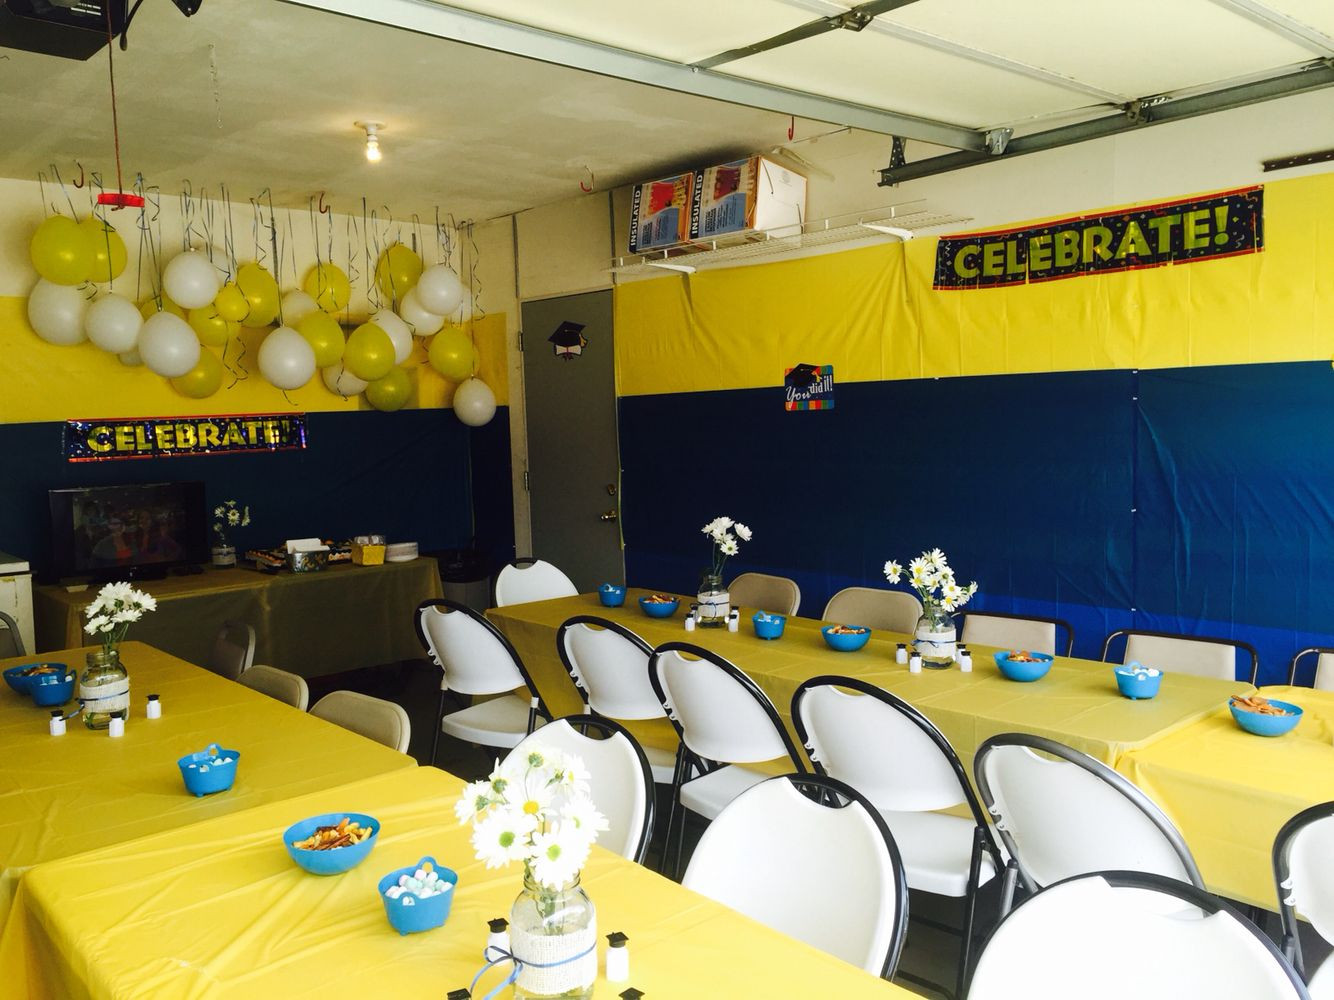 The Best Tablecloth Ideas for Graduation Party - Home, Family, Style ...